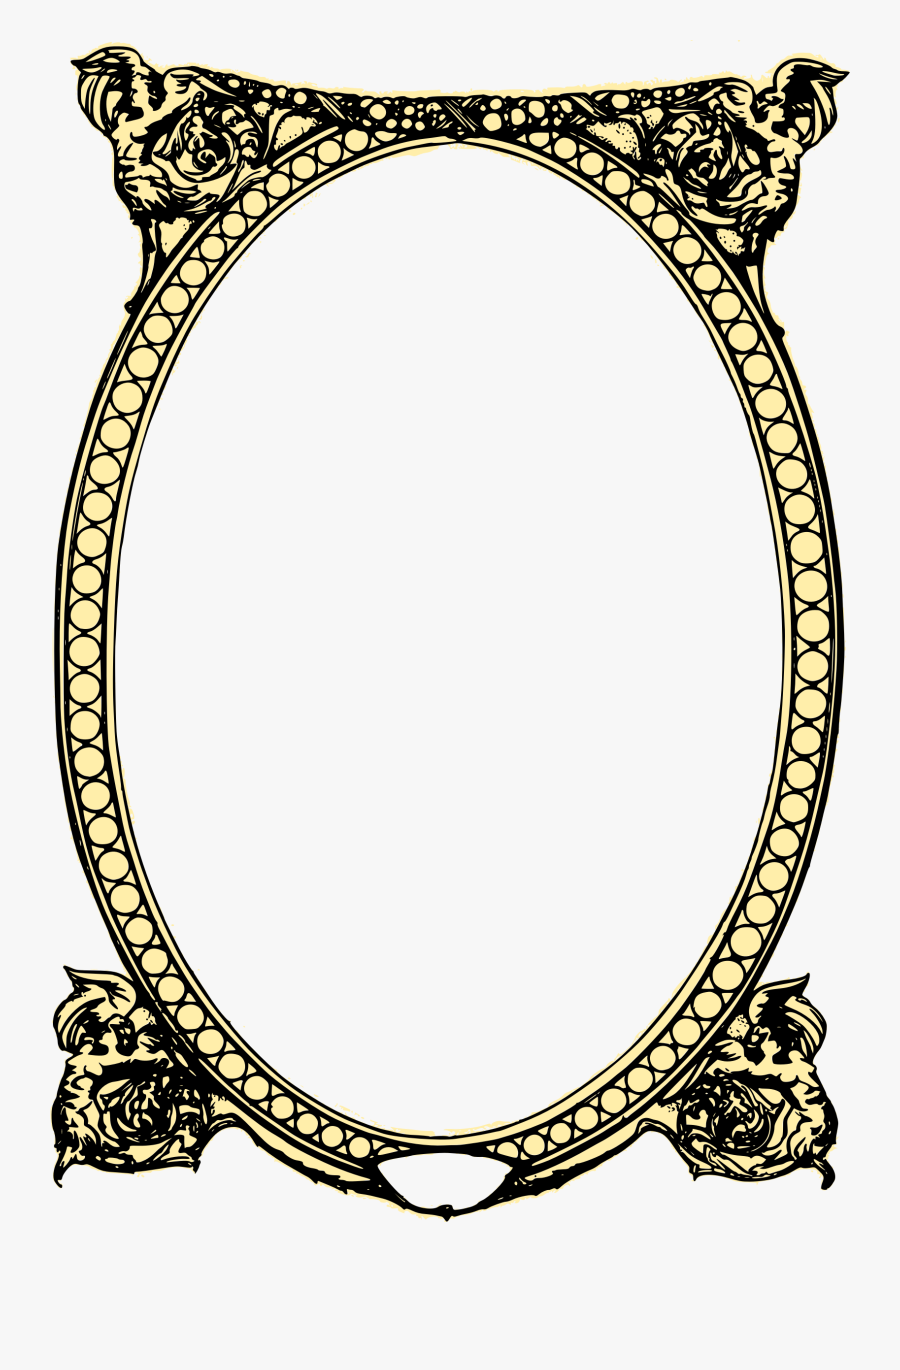 Picture Transparent Library Odd Big Image Png - Grand Lodge Of Ireland ...